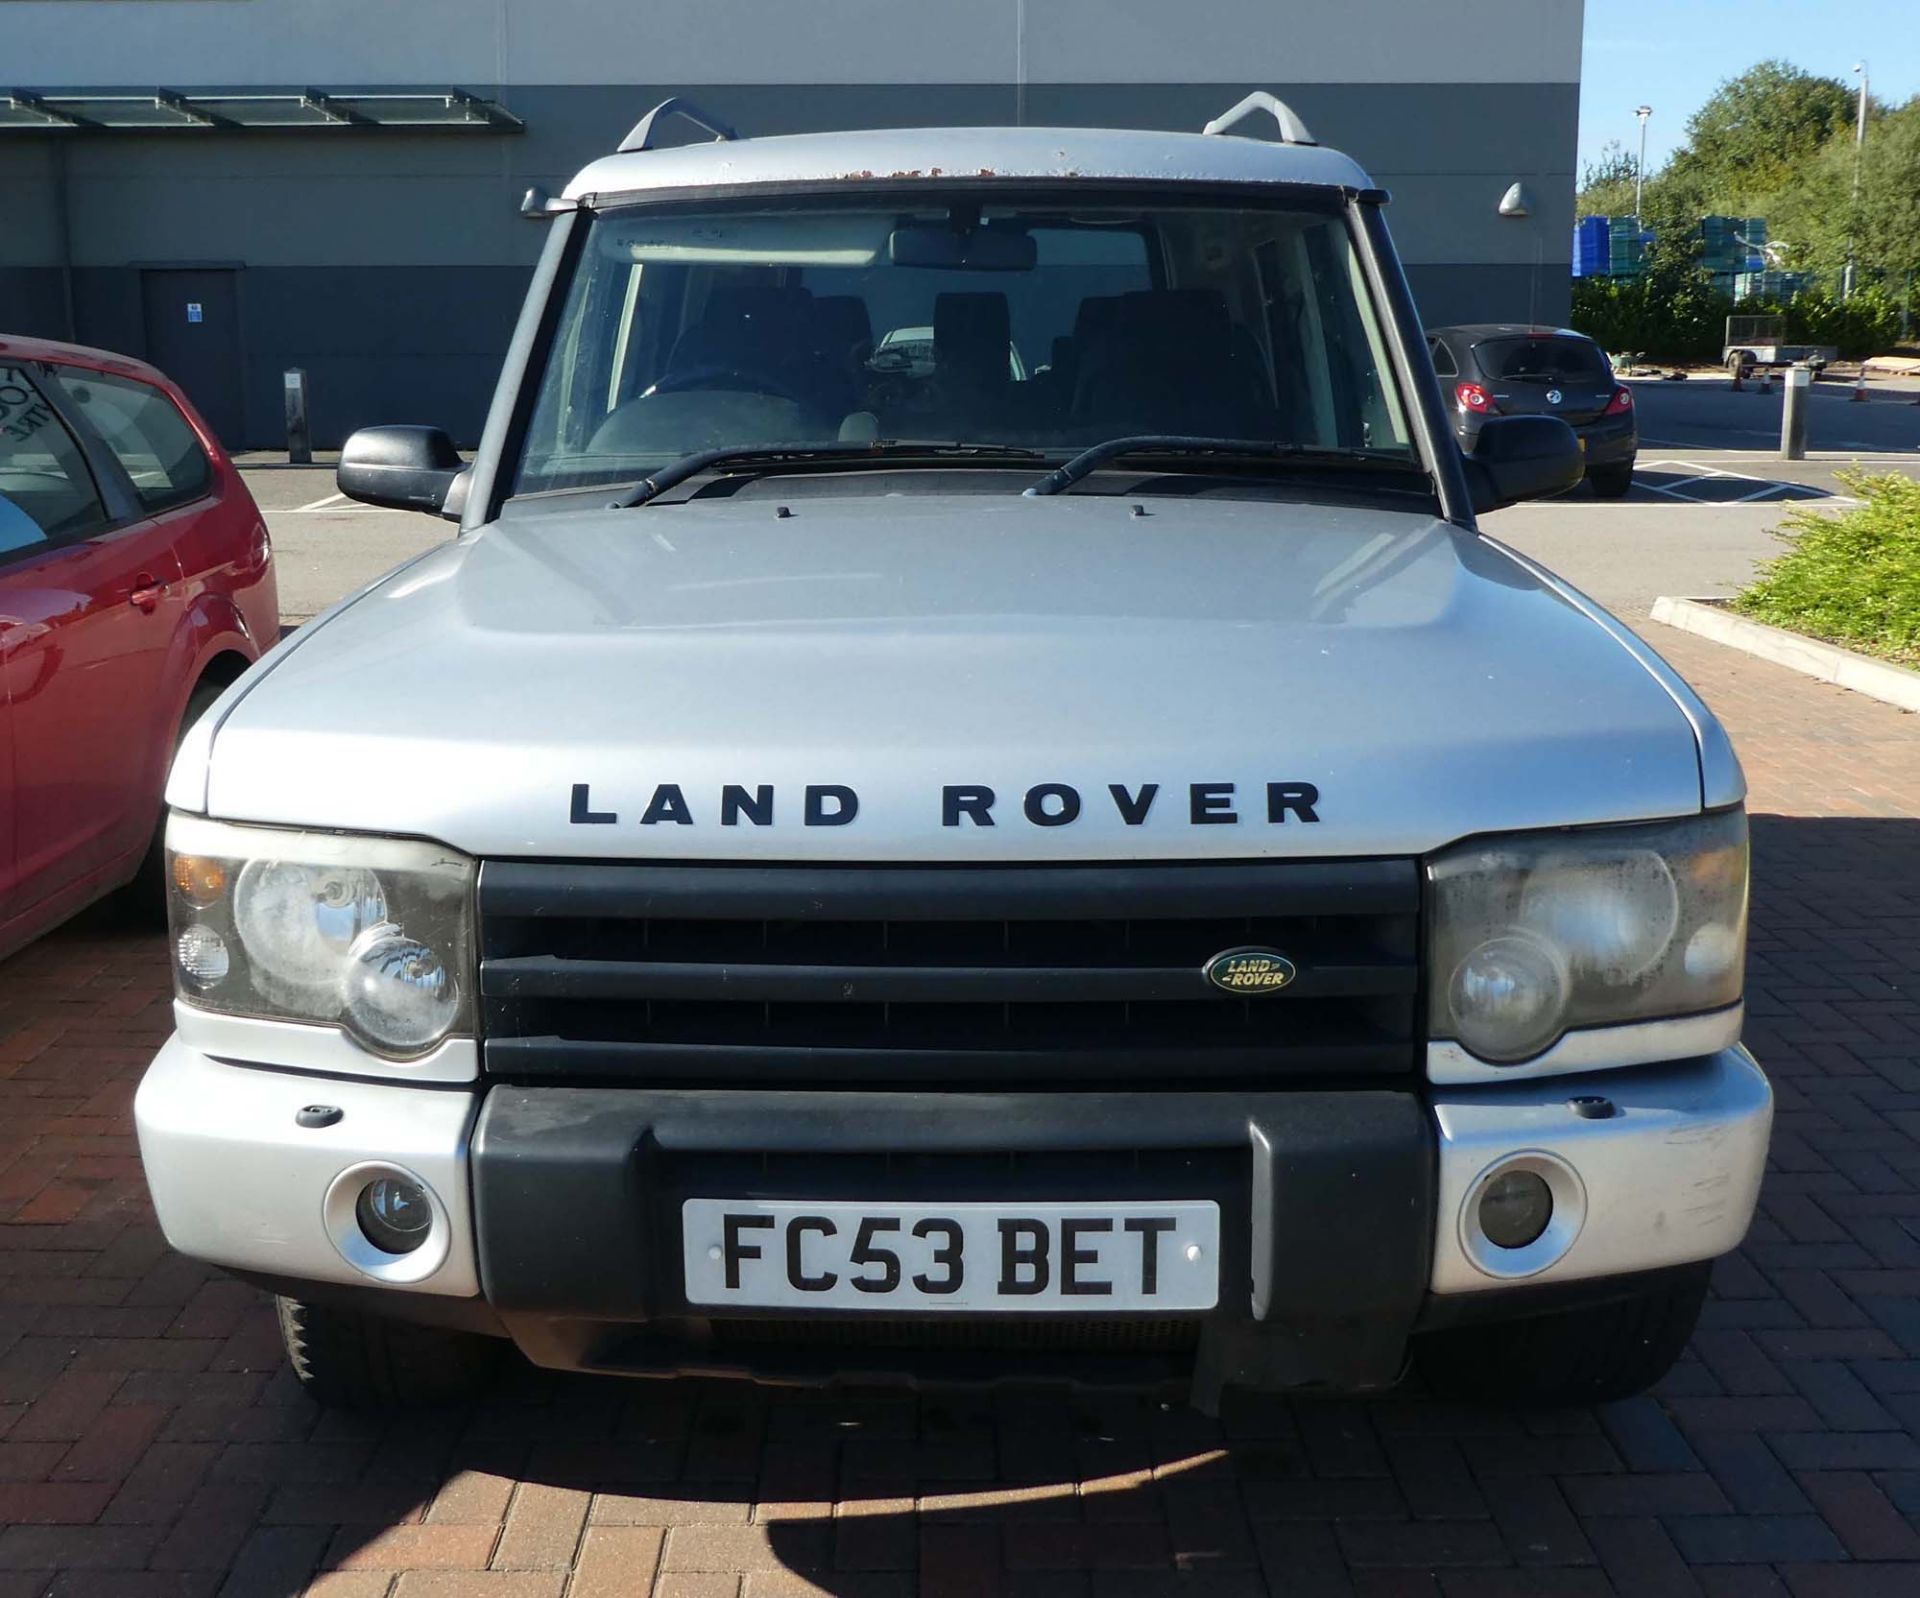 FC53 BET Land Rover Discovery TD5 S in silver, 2495cc, first registered 08.09.2003, diesel, approx - Image 9 of 11